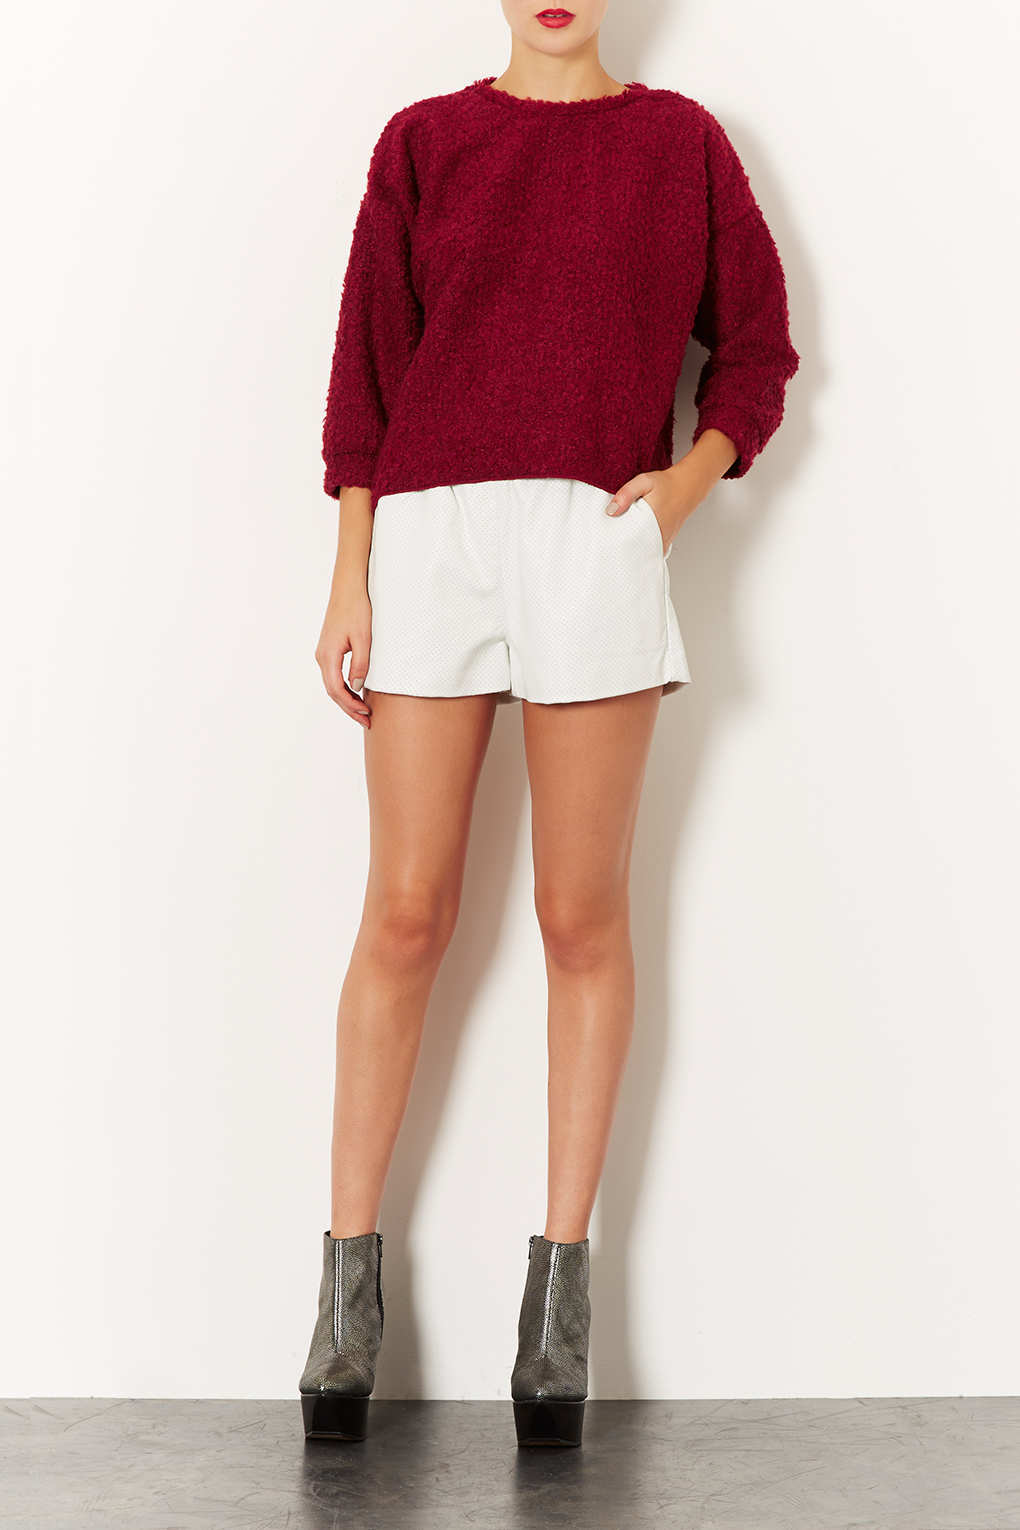 Lyst - Topshop Fluffy Sweat in Red